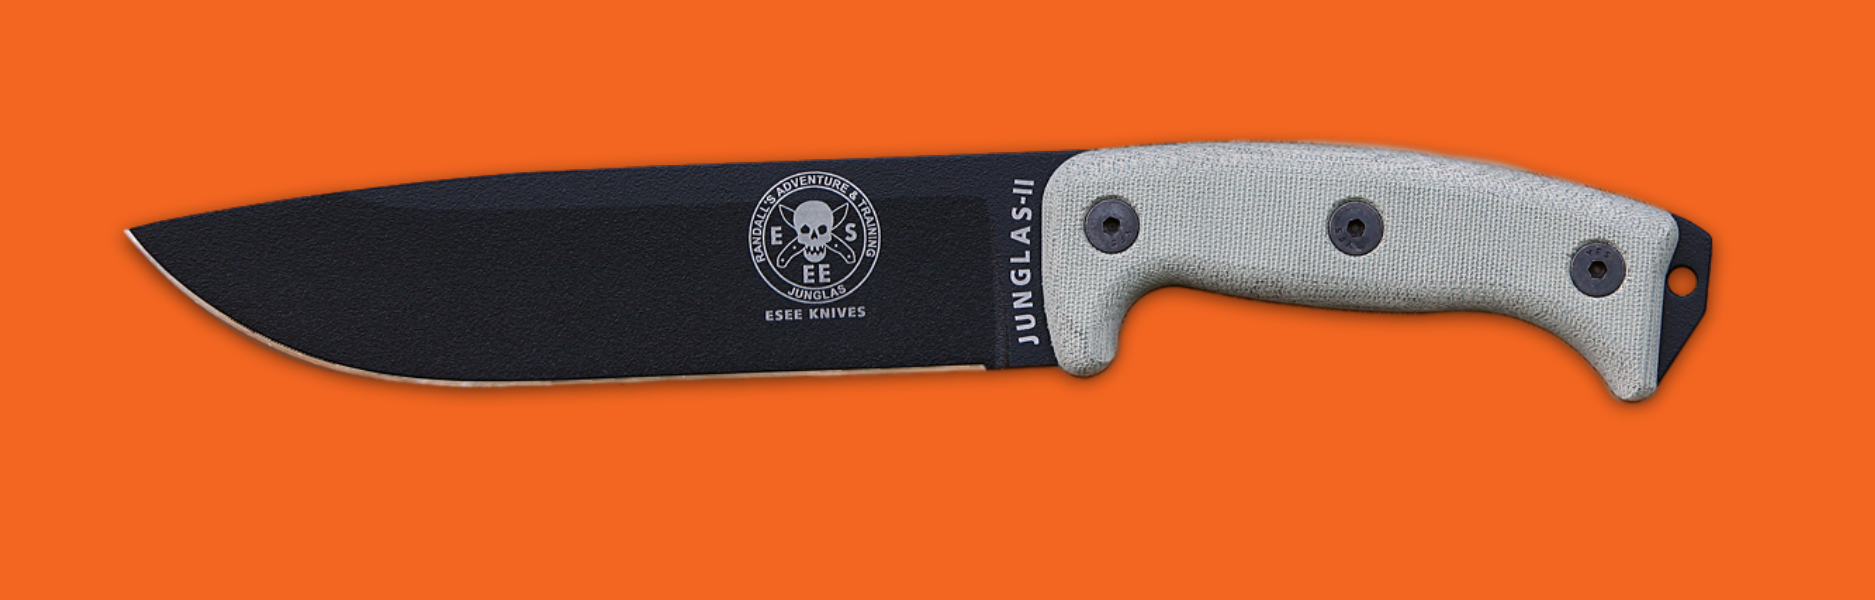 proelia and sling blade knives come from the same company